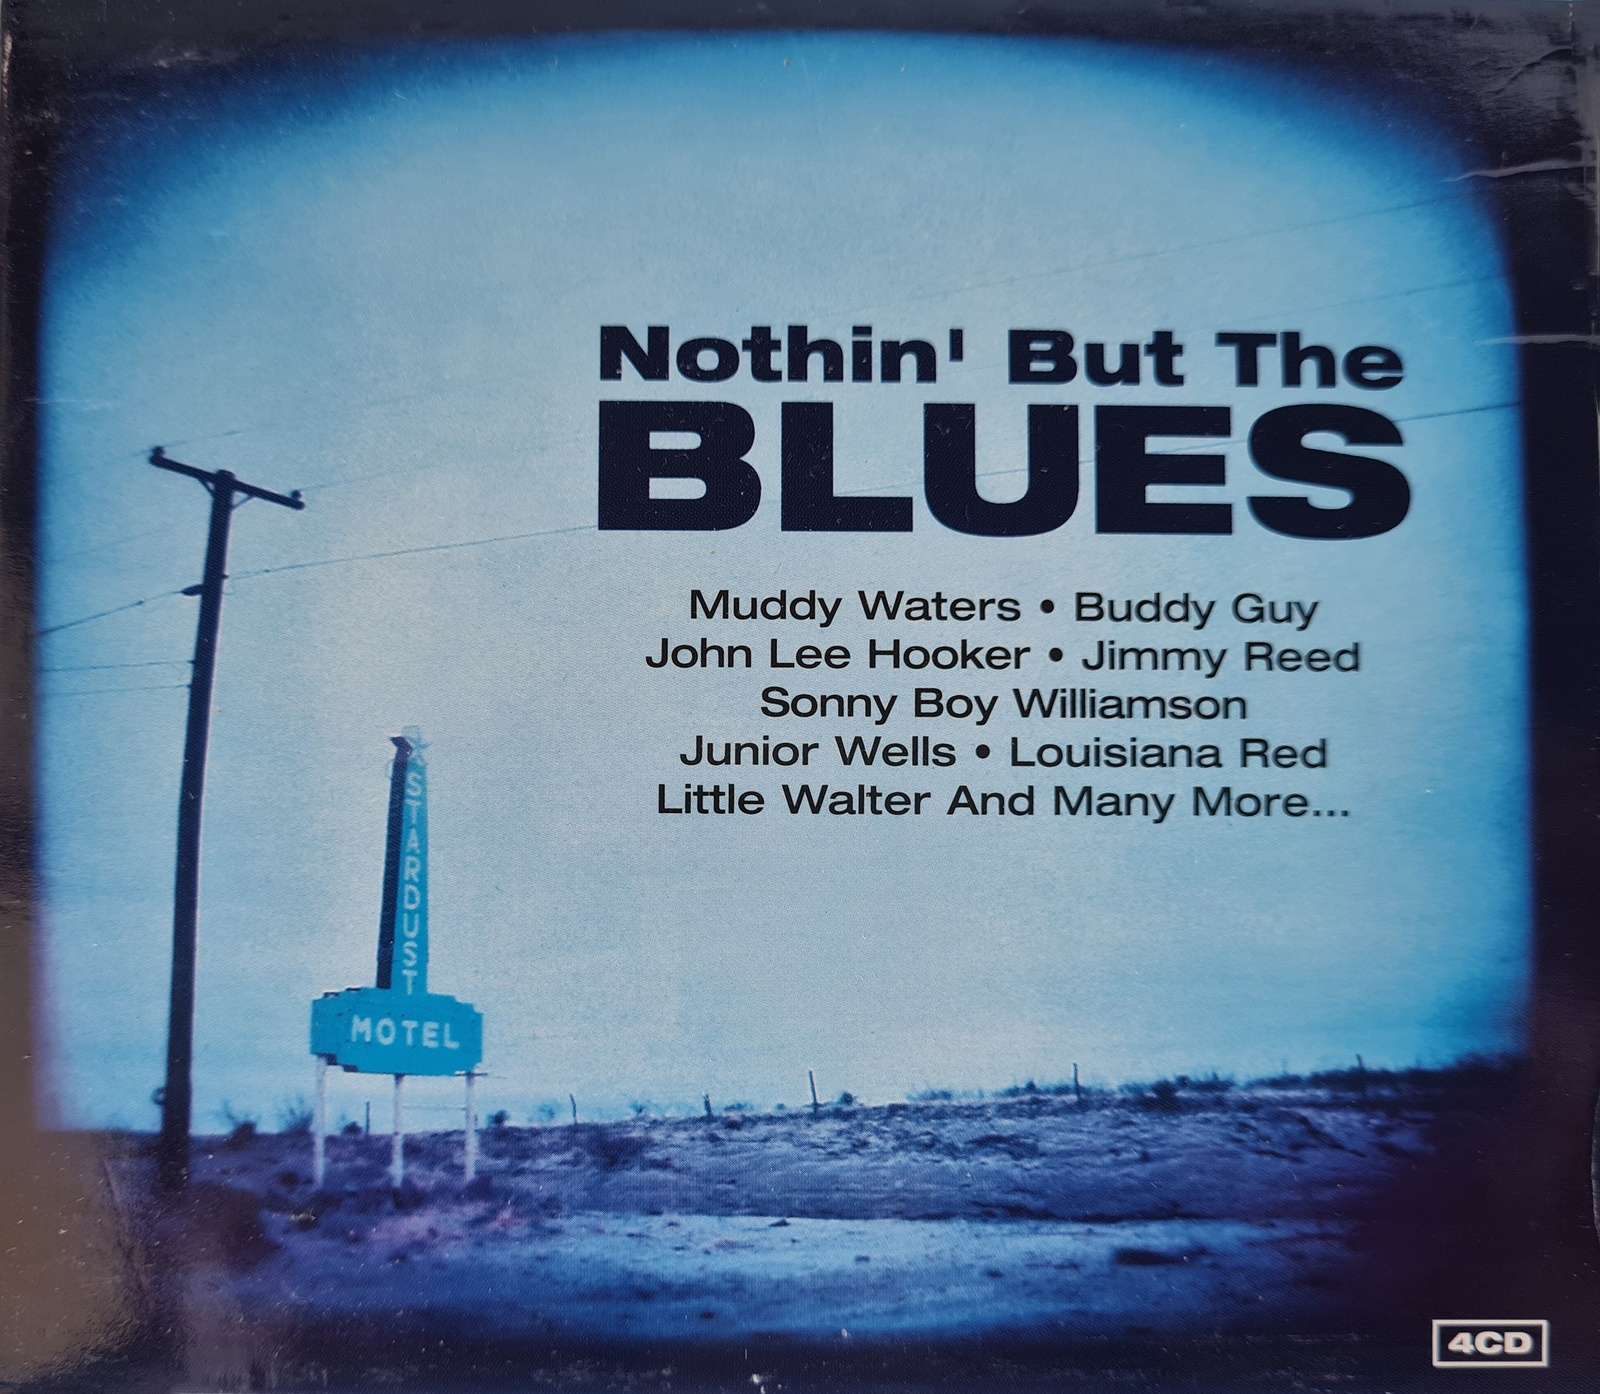 Nothin' But the Blues - 4 Disc Blues Compilation (CD)